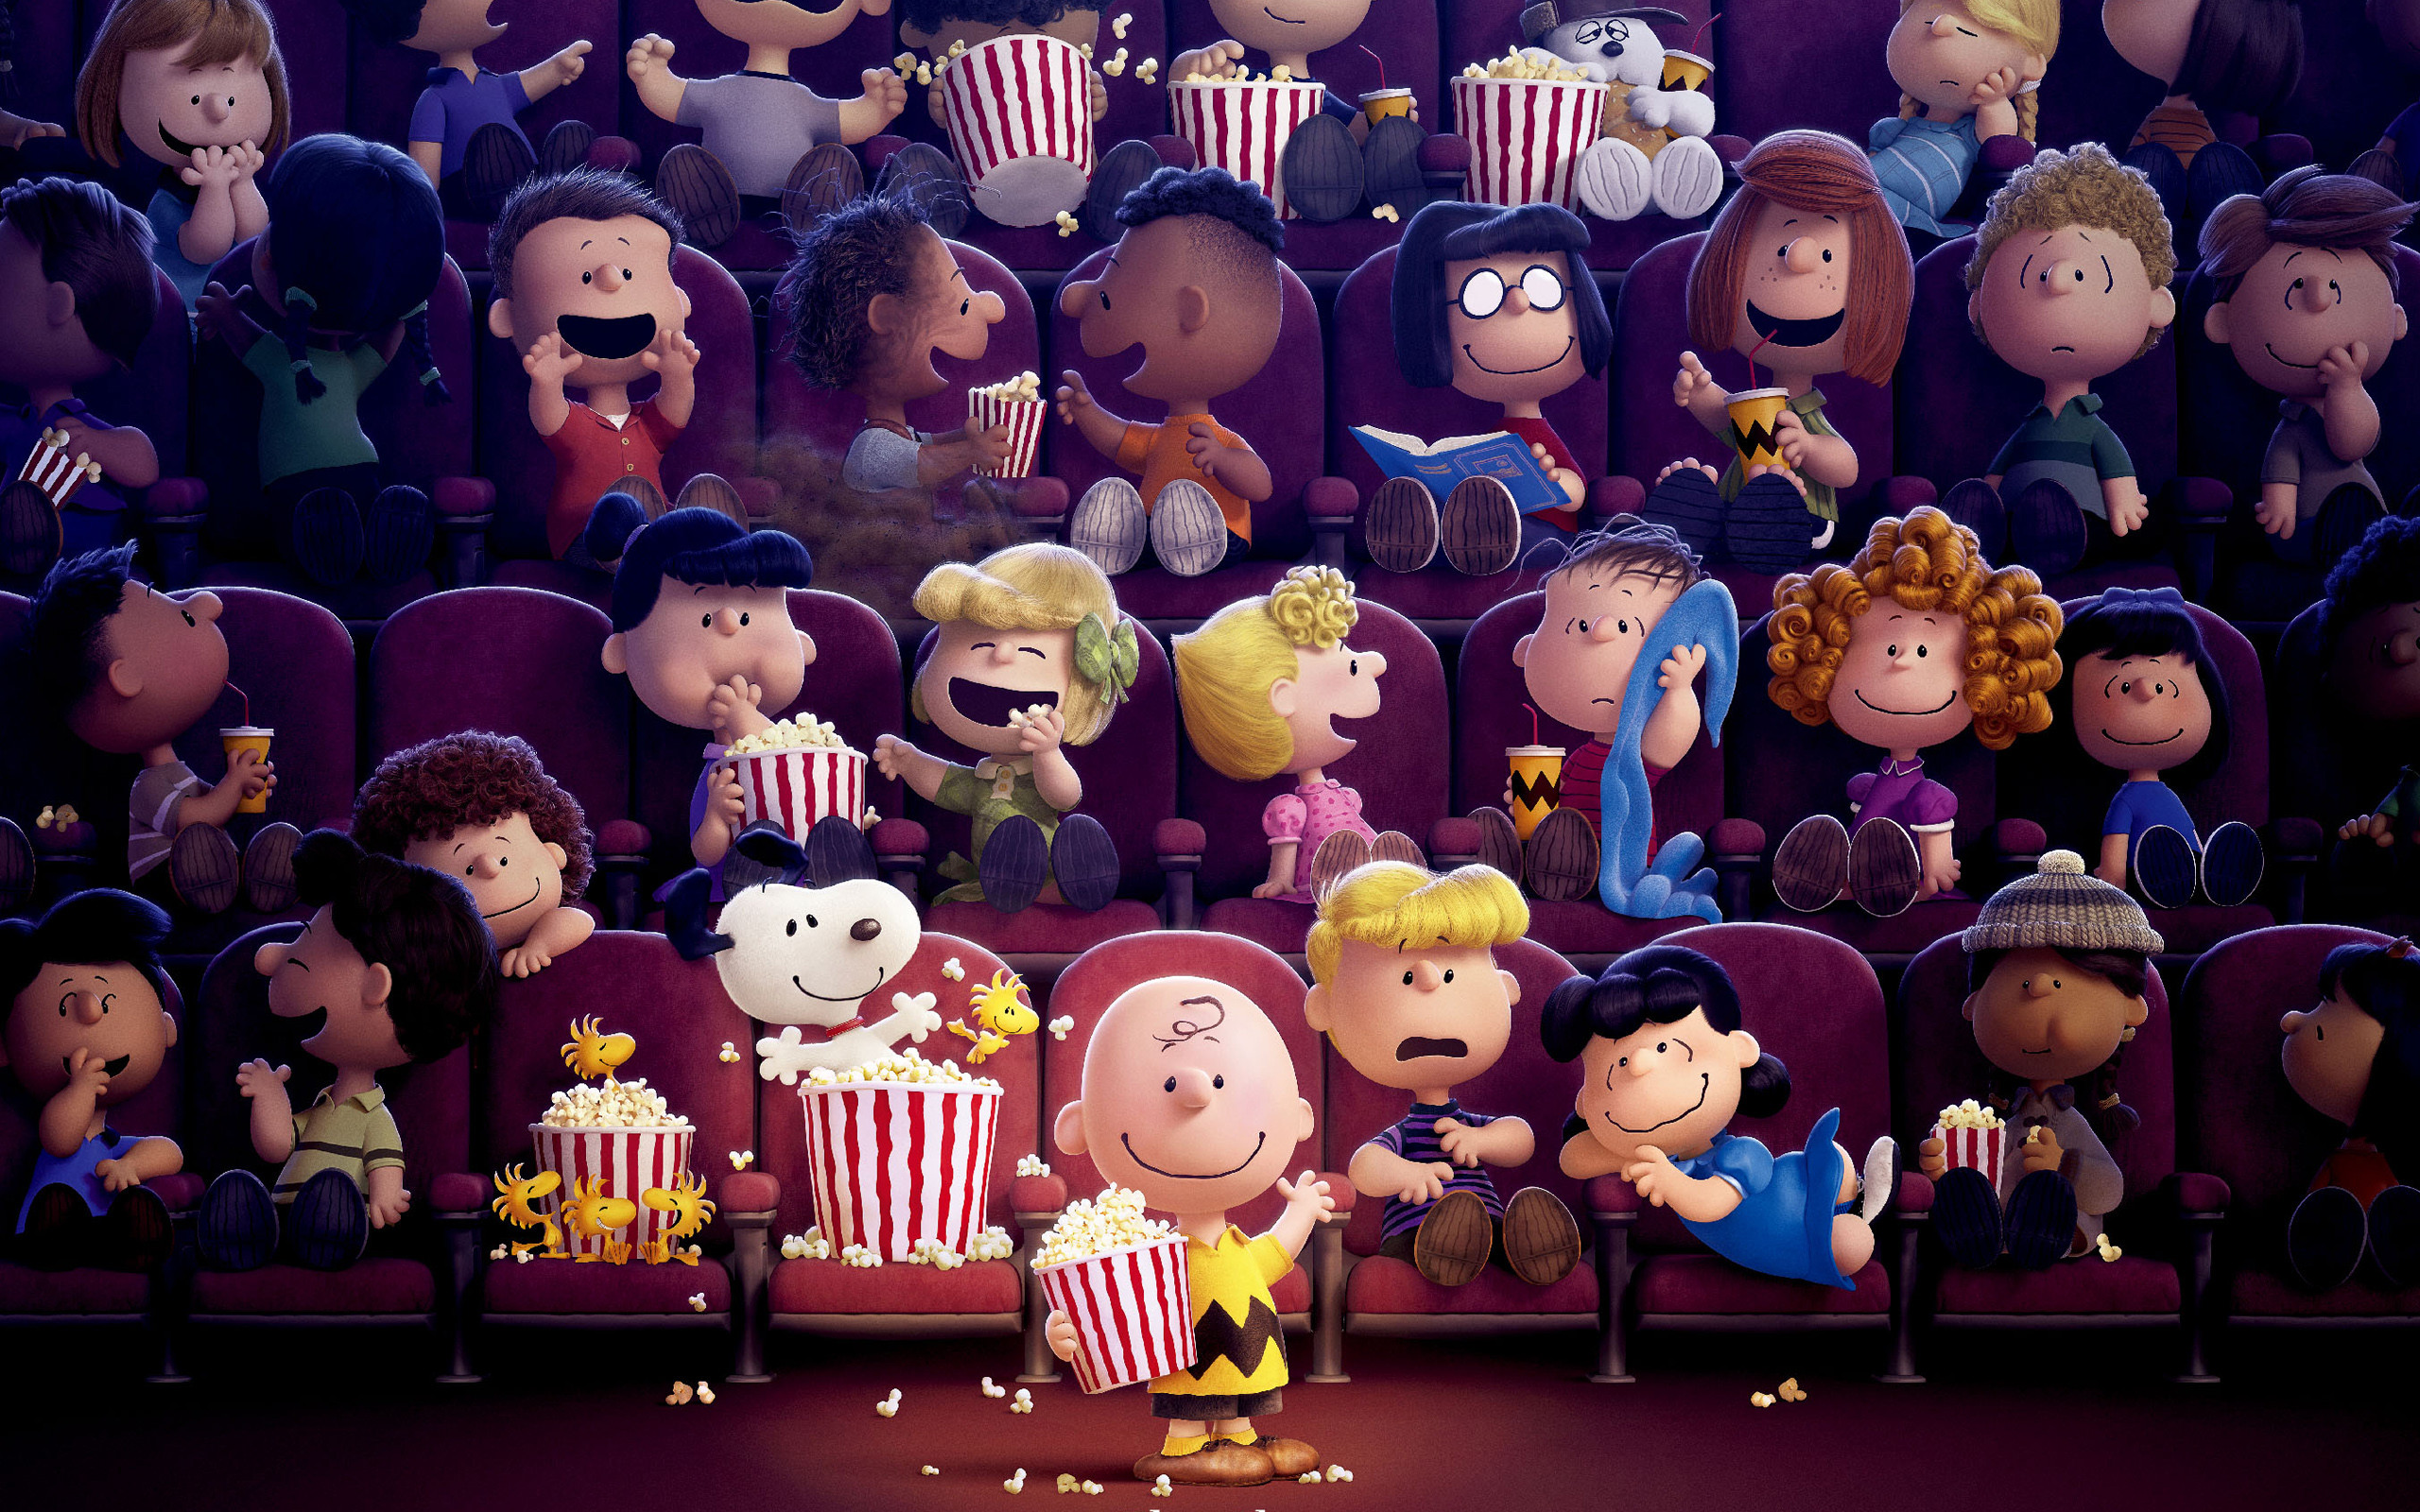 2560x1600 0 1600x1200 The Movies Wallpaper  The Peanuts Movie Wallpapers  Wallpapers HD